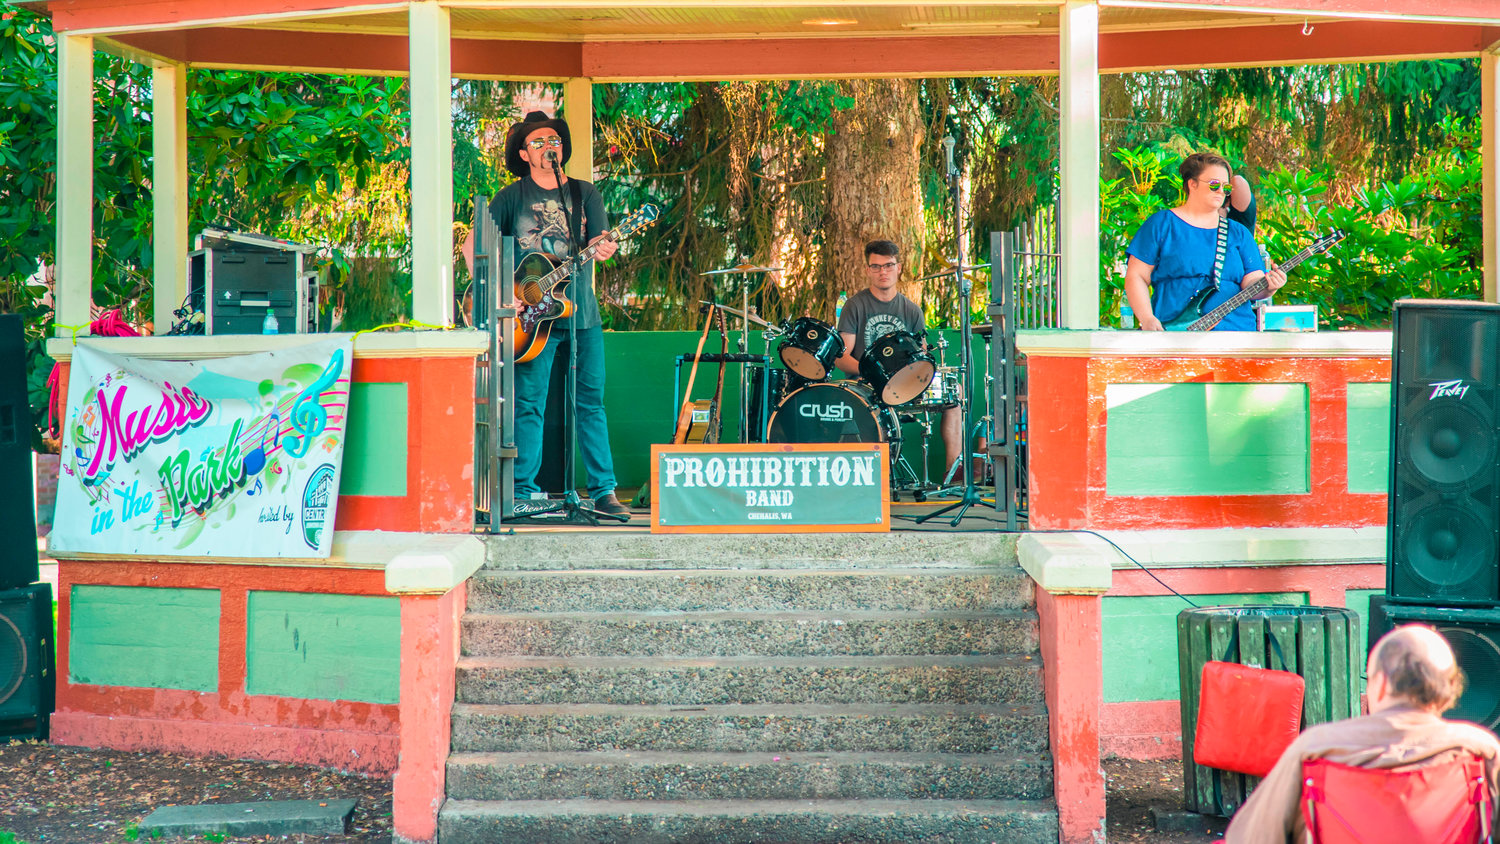 The Prohibition Band plays in the George Washington Park gazebo Saturday during a “Music in the Park” event Saturday in Centralia.